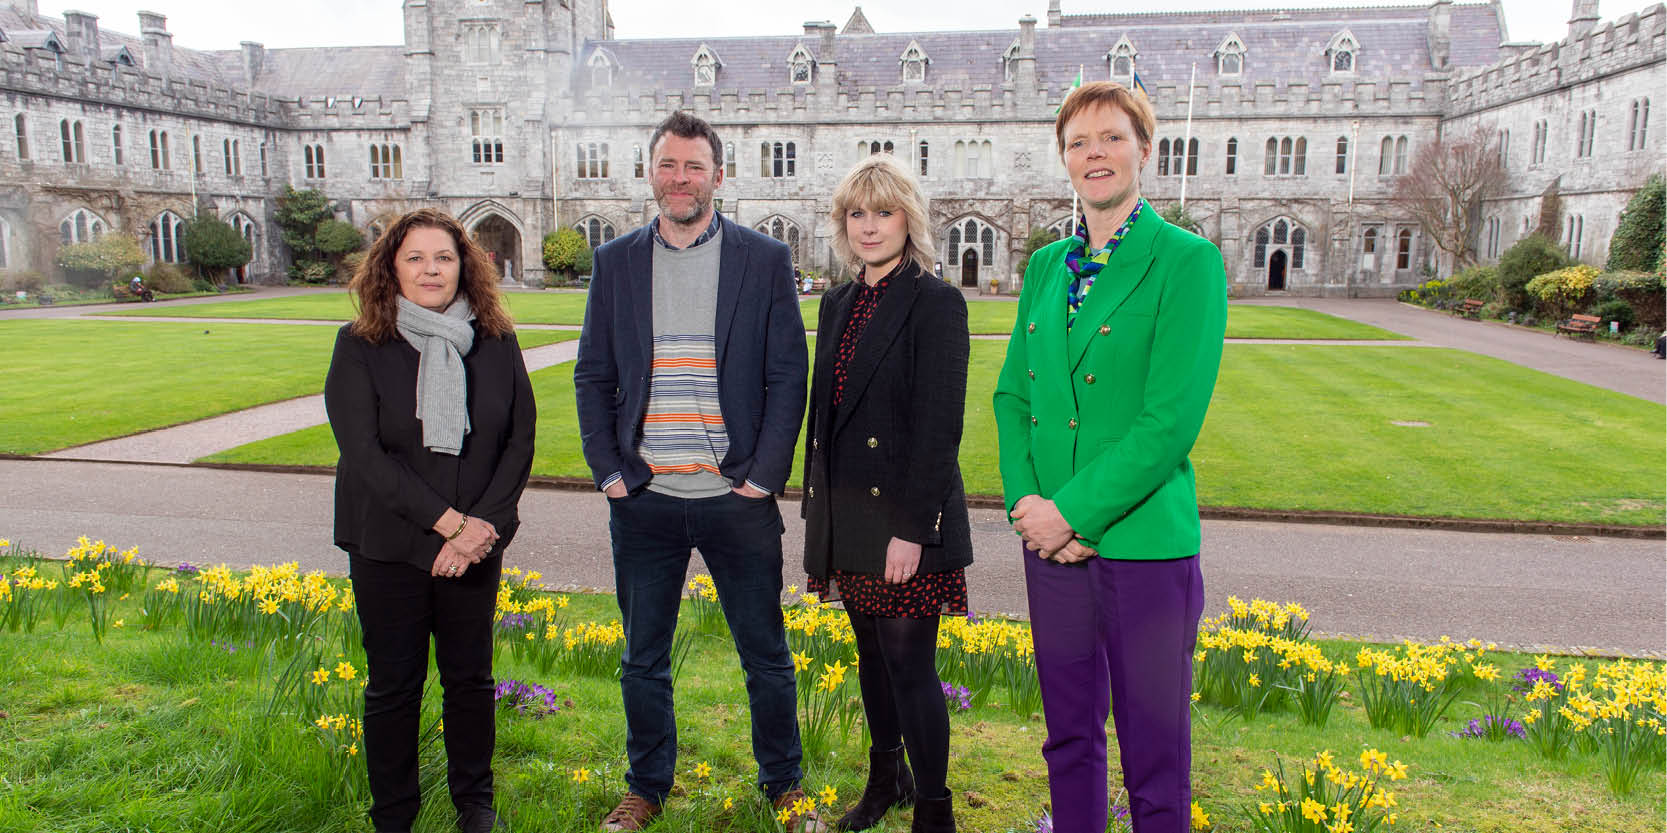 Dr Susan Joyce, School of Biochemistry and Cell Biology; Dr Gerard McGlacken, Vice Dean for Research and Innovation, SEFS; Dr Karen McCarthy, UCC Innovation Commercialisation Case Manager; Dr Sally Cudmore, Director of Innovation, UCC